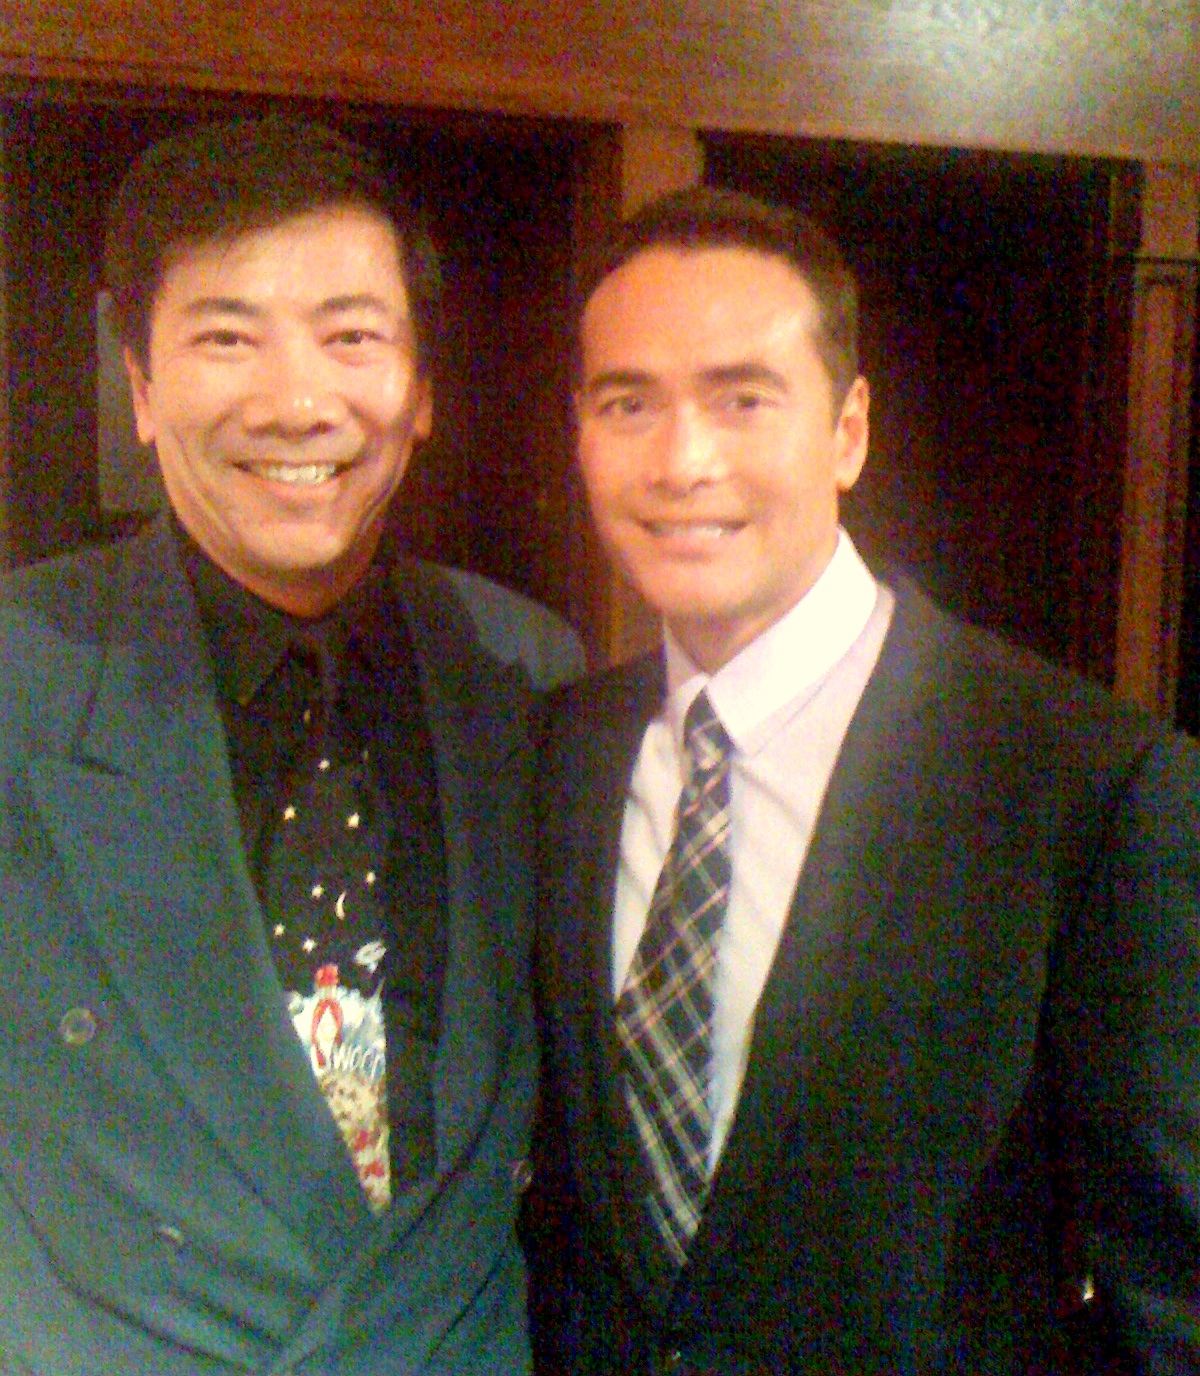 Craig Lew and Mark Dacascos at the CAPE Soiree.